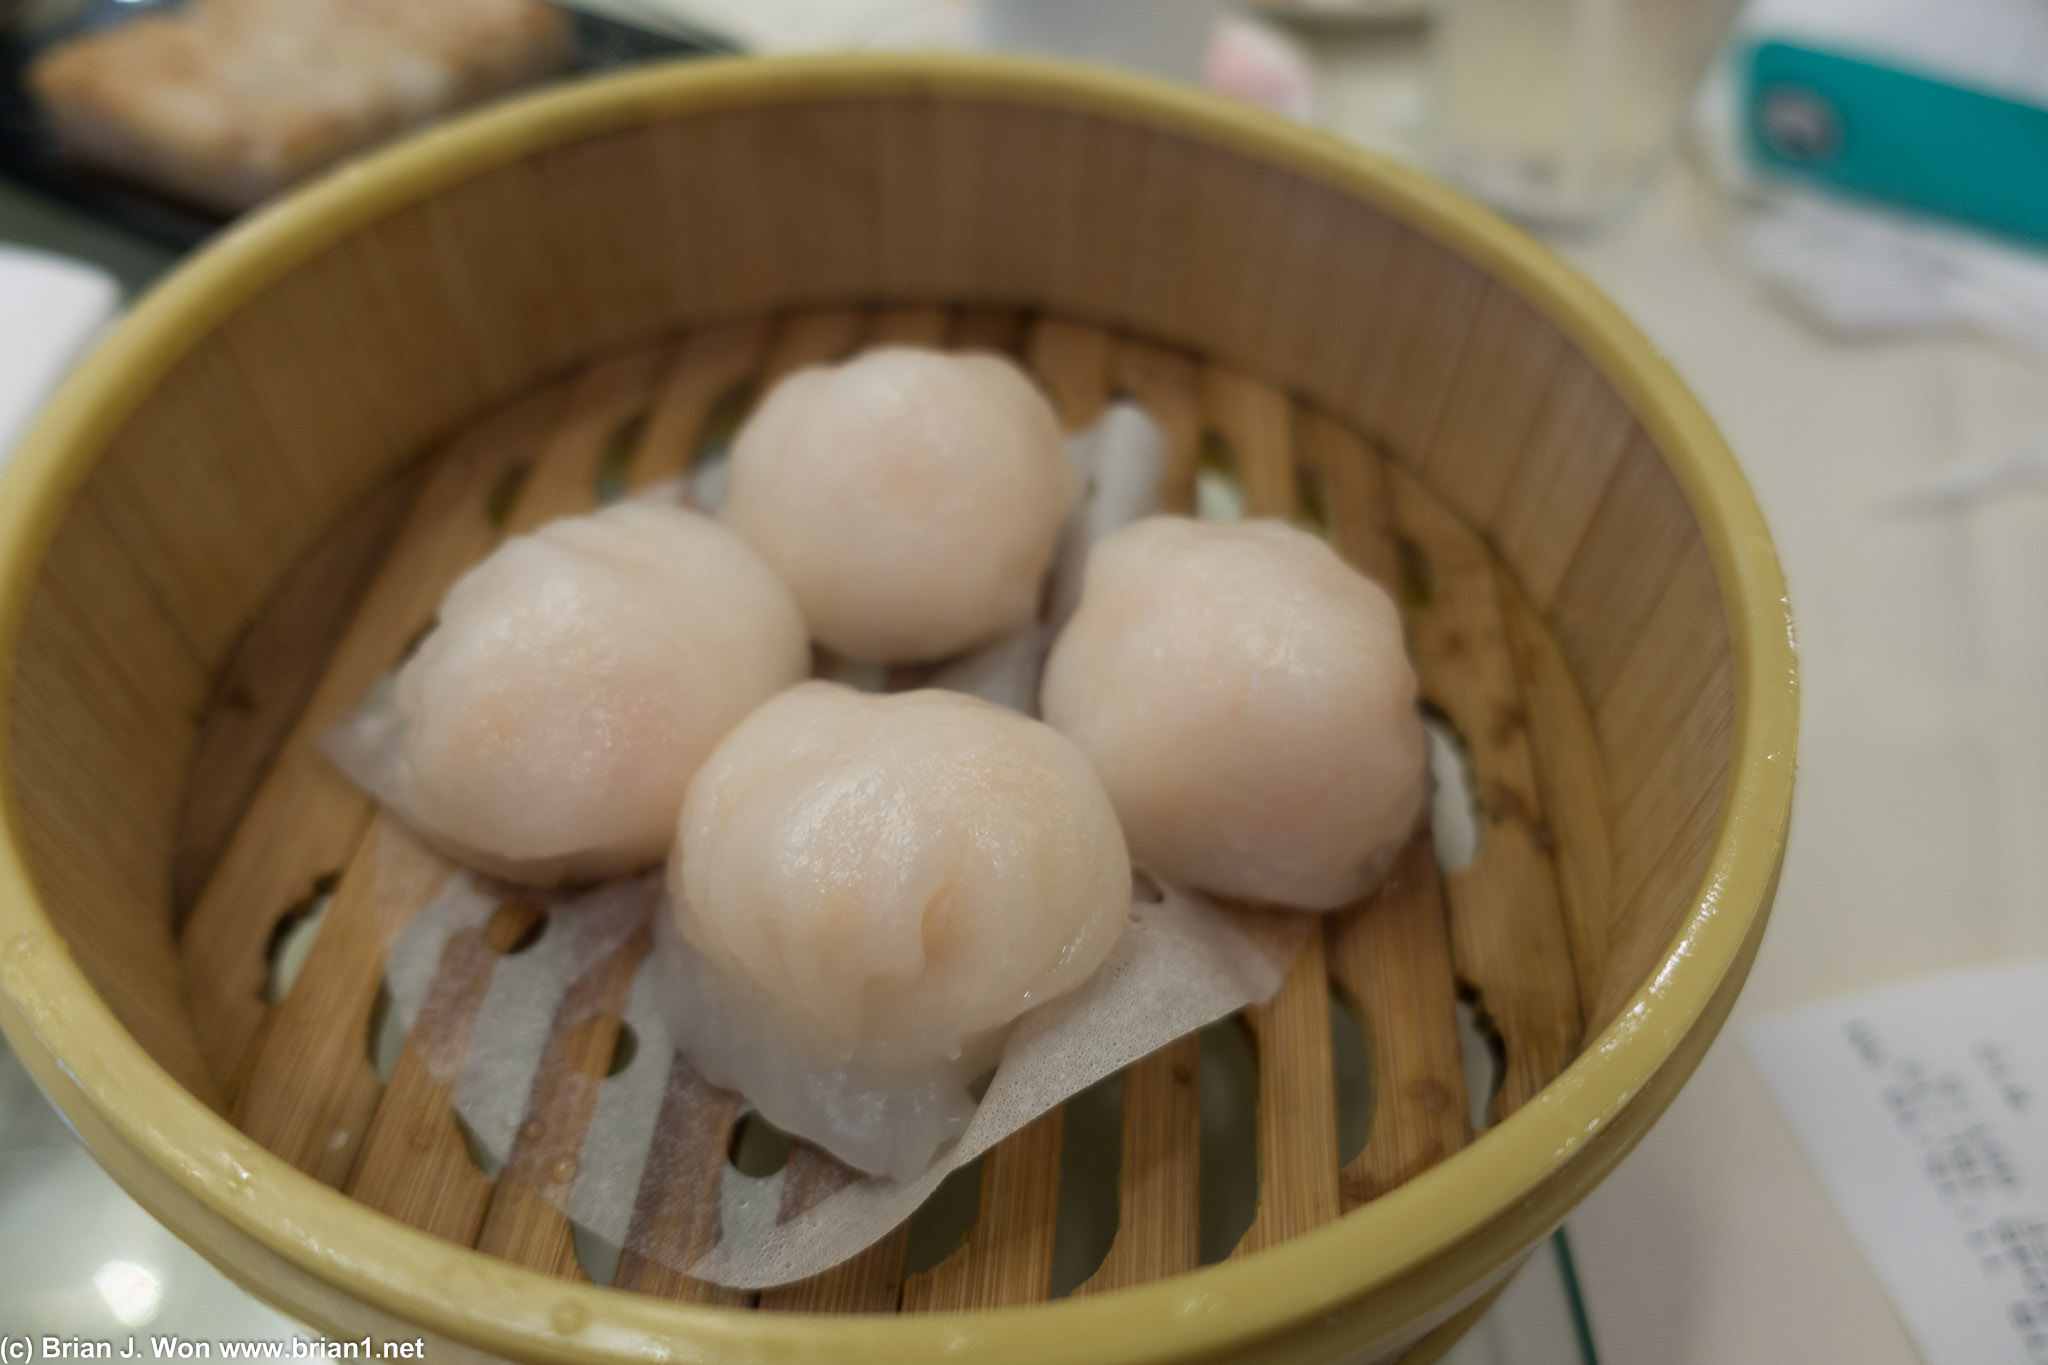 Har gow were okay. Skins not clear enough and they were a little small, but didn't feel delicate.